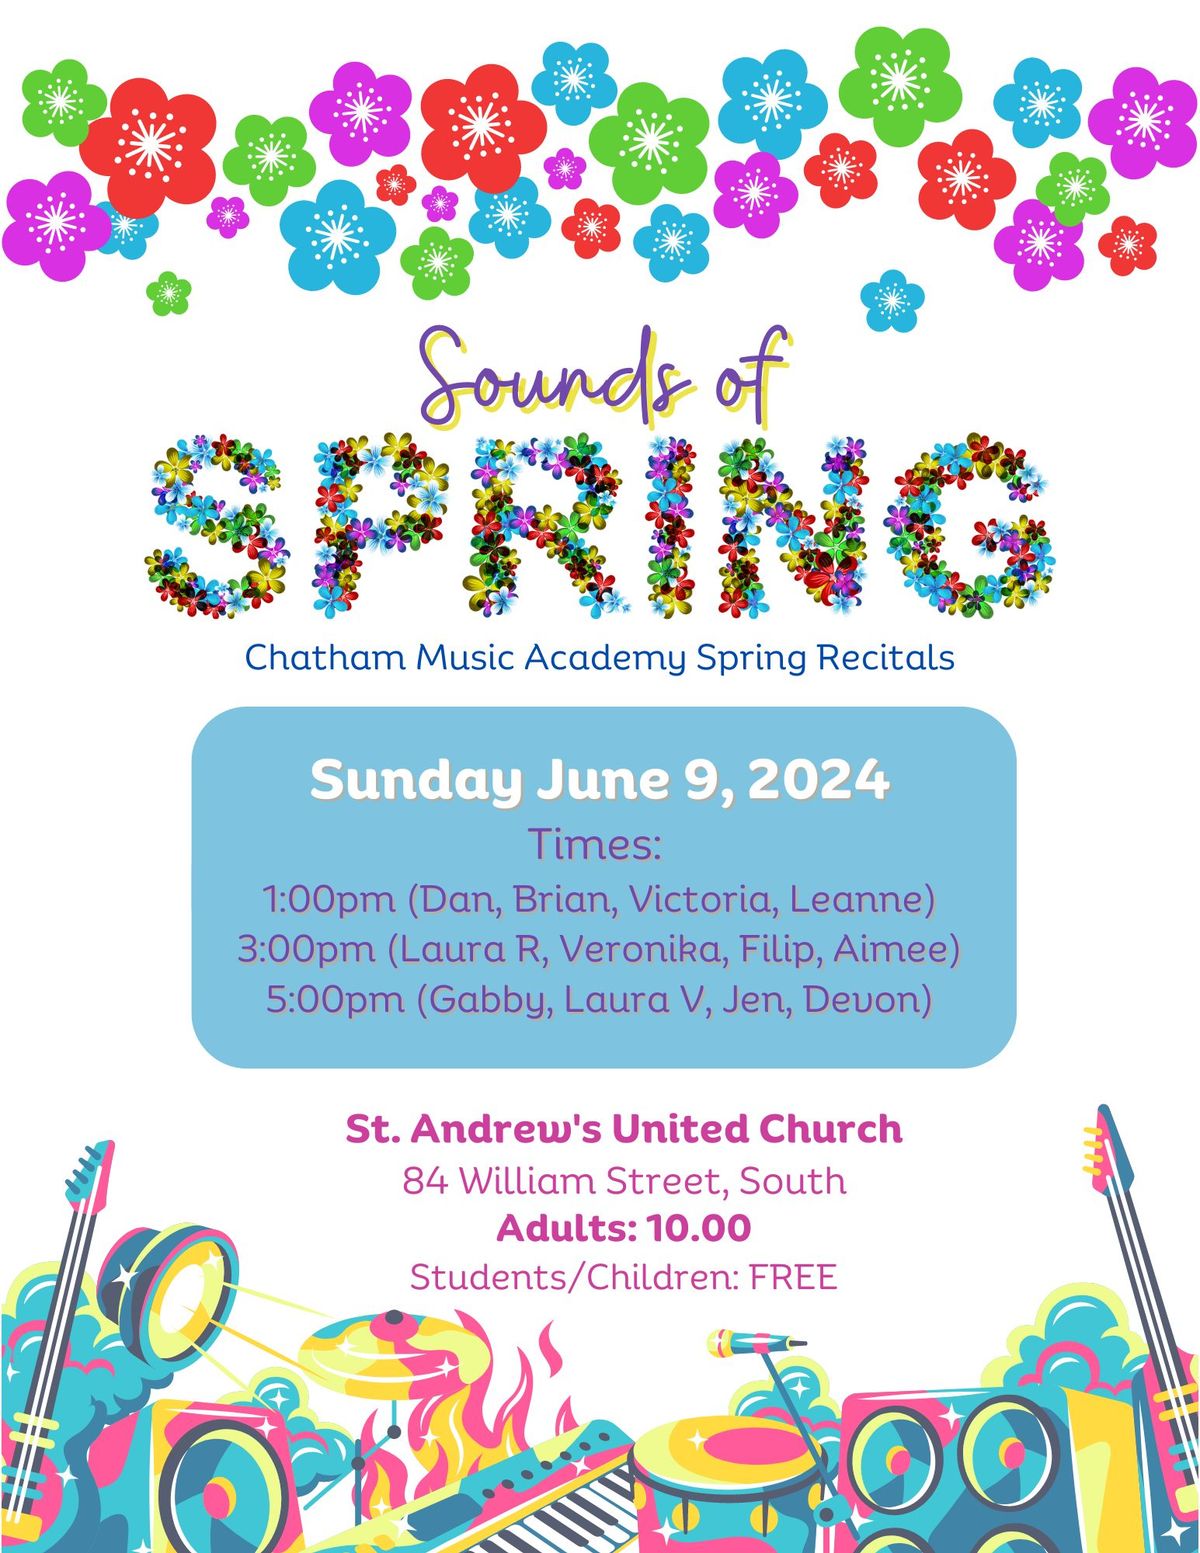 Sounds of Spring: Year-End Recitals